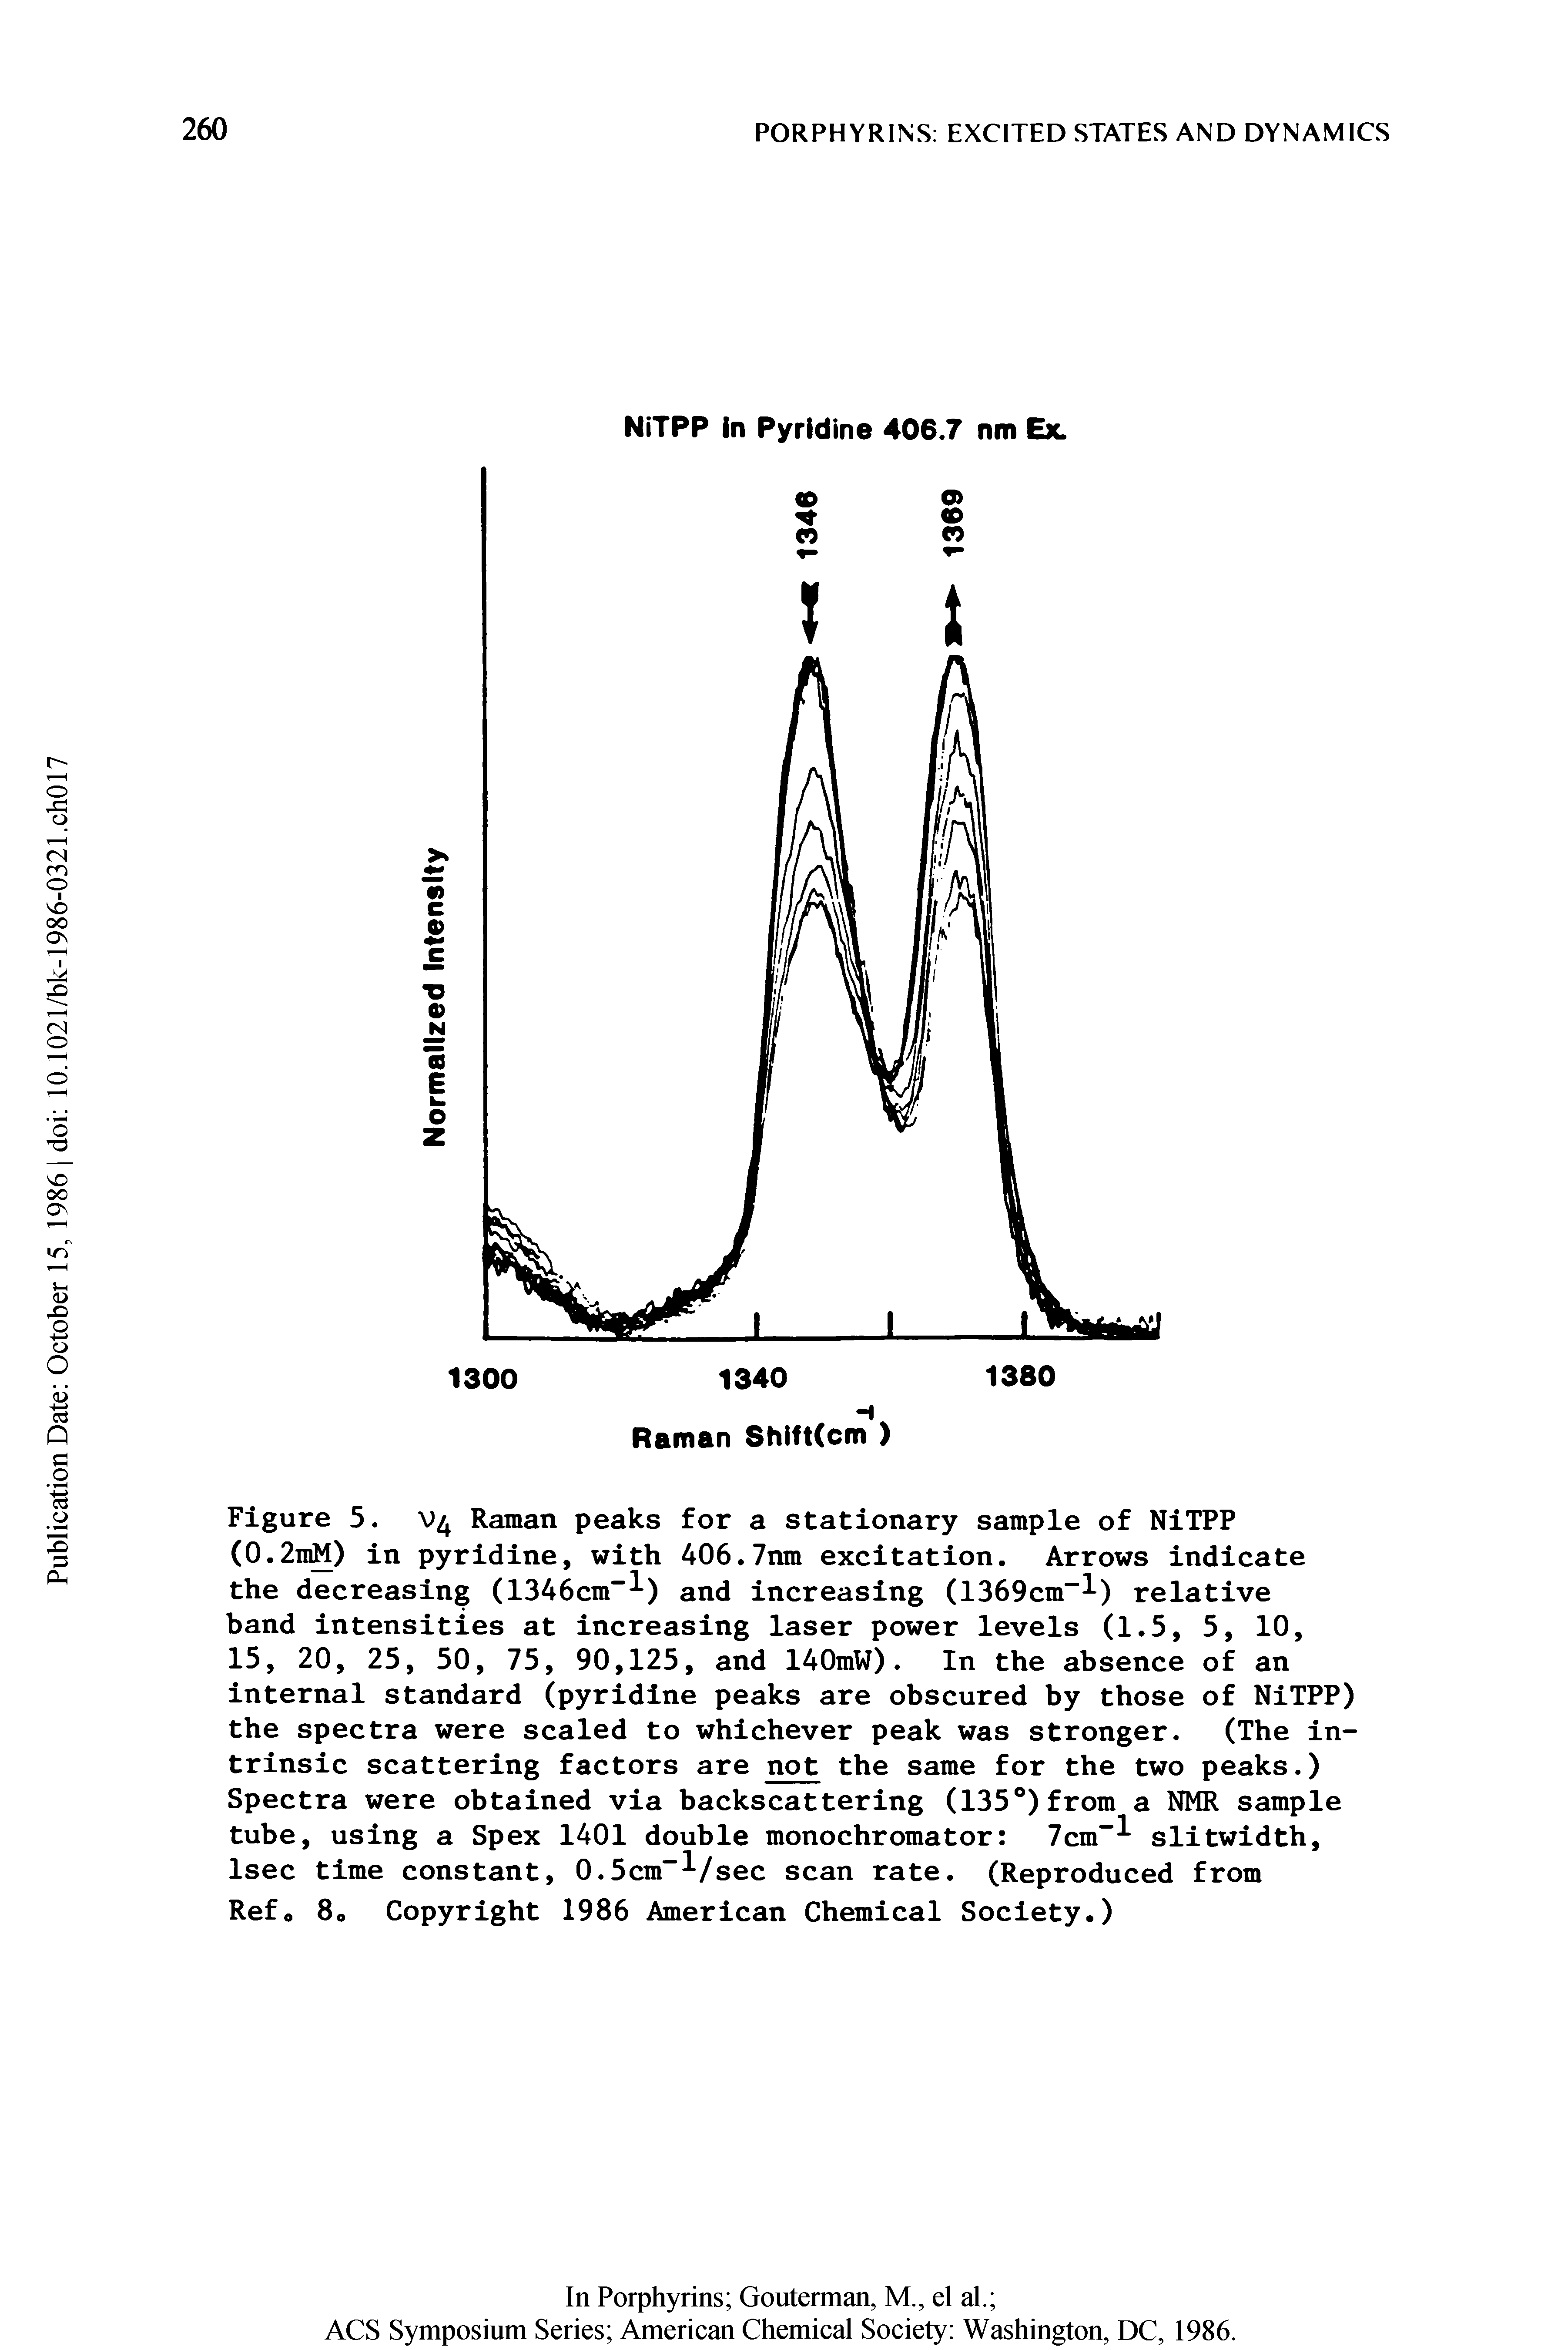 Figure 5. V4 Raman peaks for a stationary sample of NiTPP (0.2n ) in pyridine, with 406.7nm excitation. Arrows indicate the decreasing (1346cm ) and increasing (1369cm"l) relative band intensities at increasing laser power levels (1.5, 5, 10,...